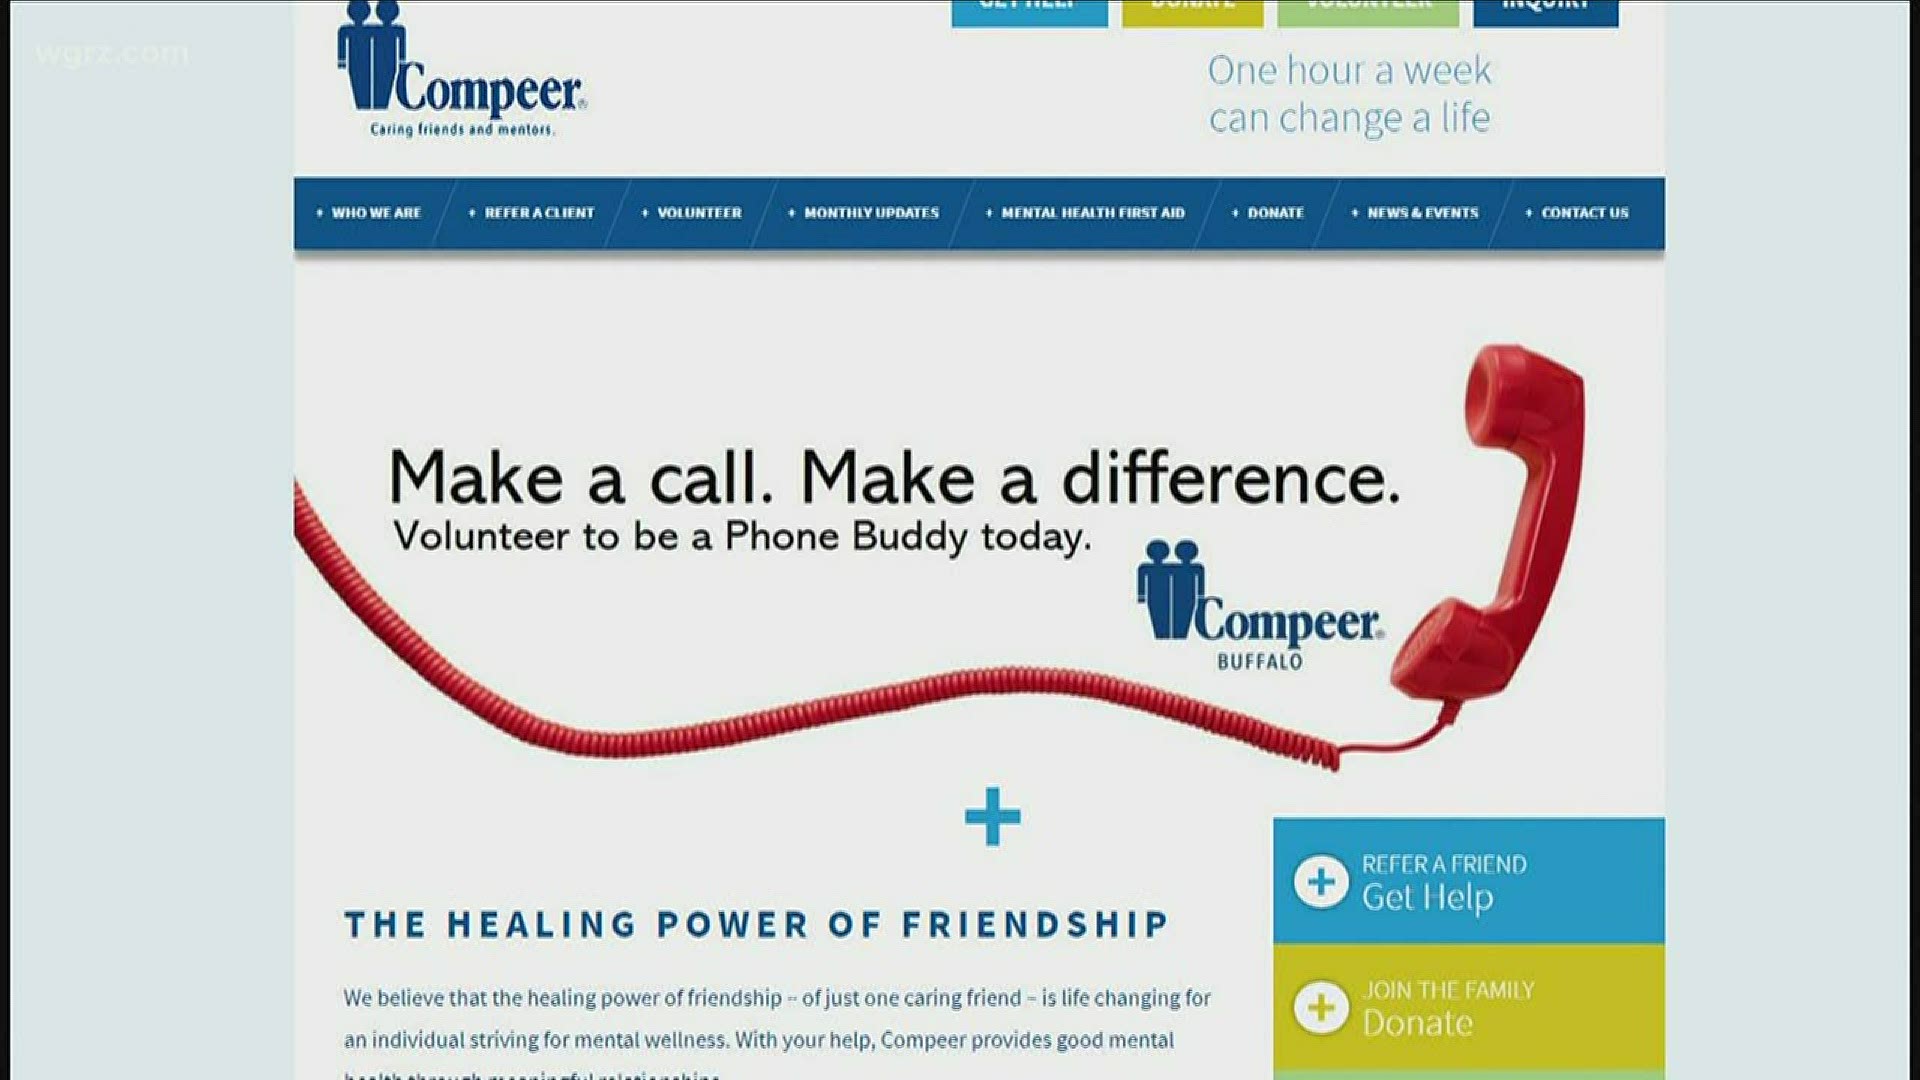 Compeer is a non-profit in WNY designed to help those dealing with mental health issues. Normally they have volunteers who meet up to help out, but now can't.